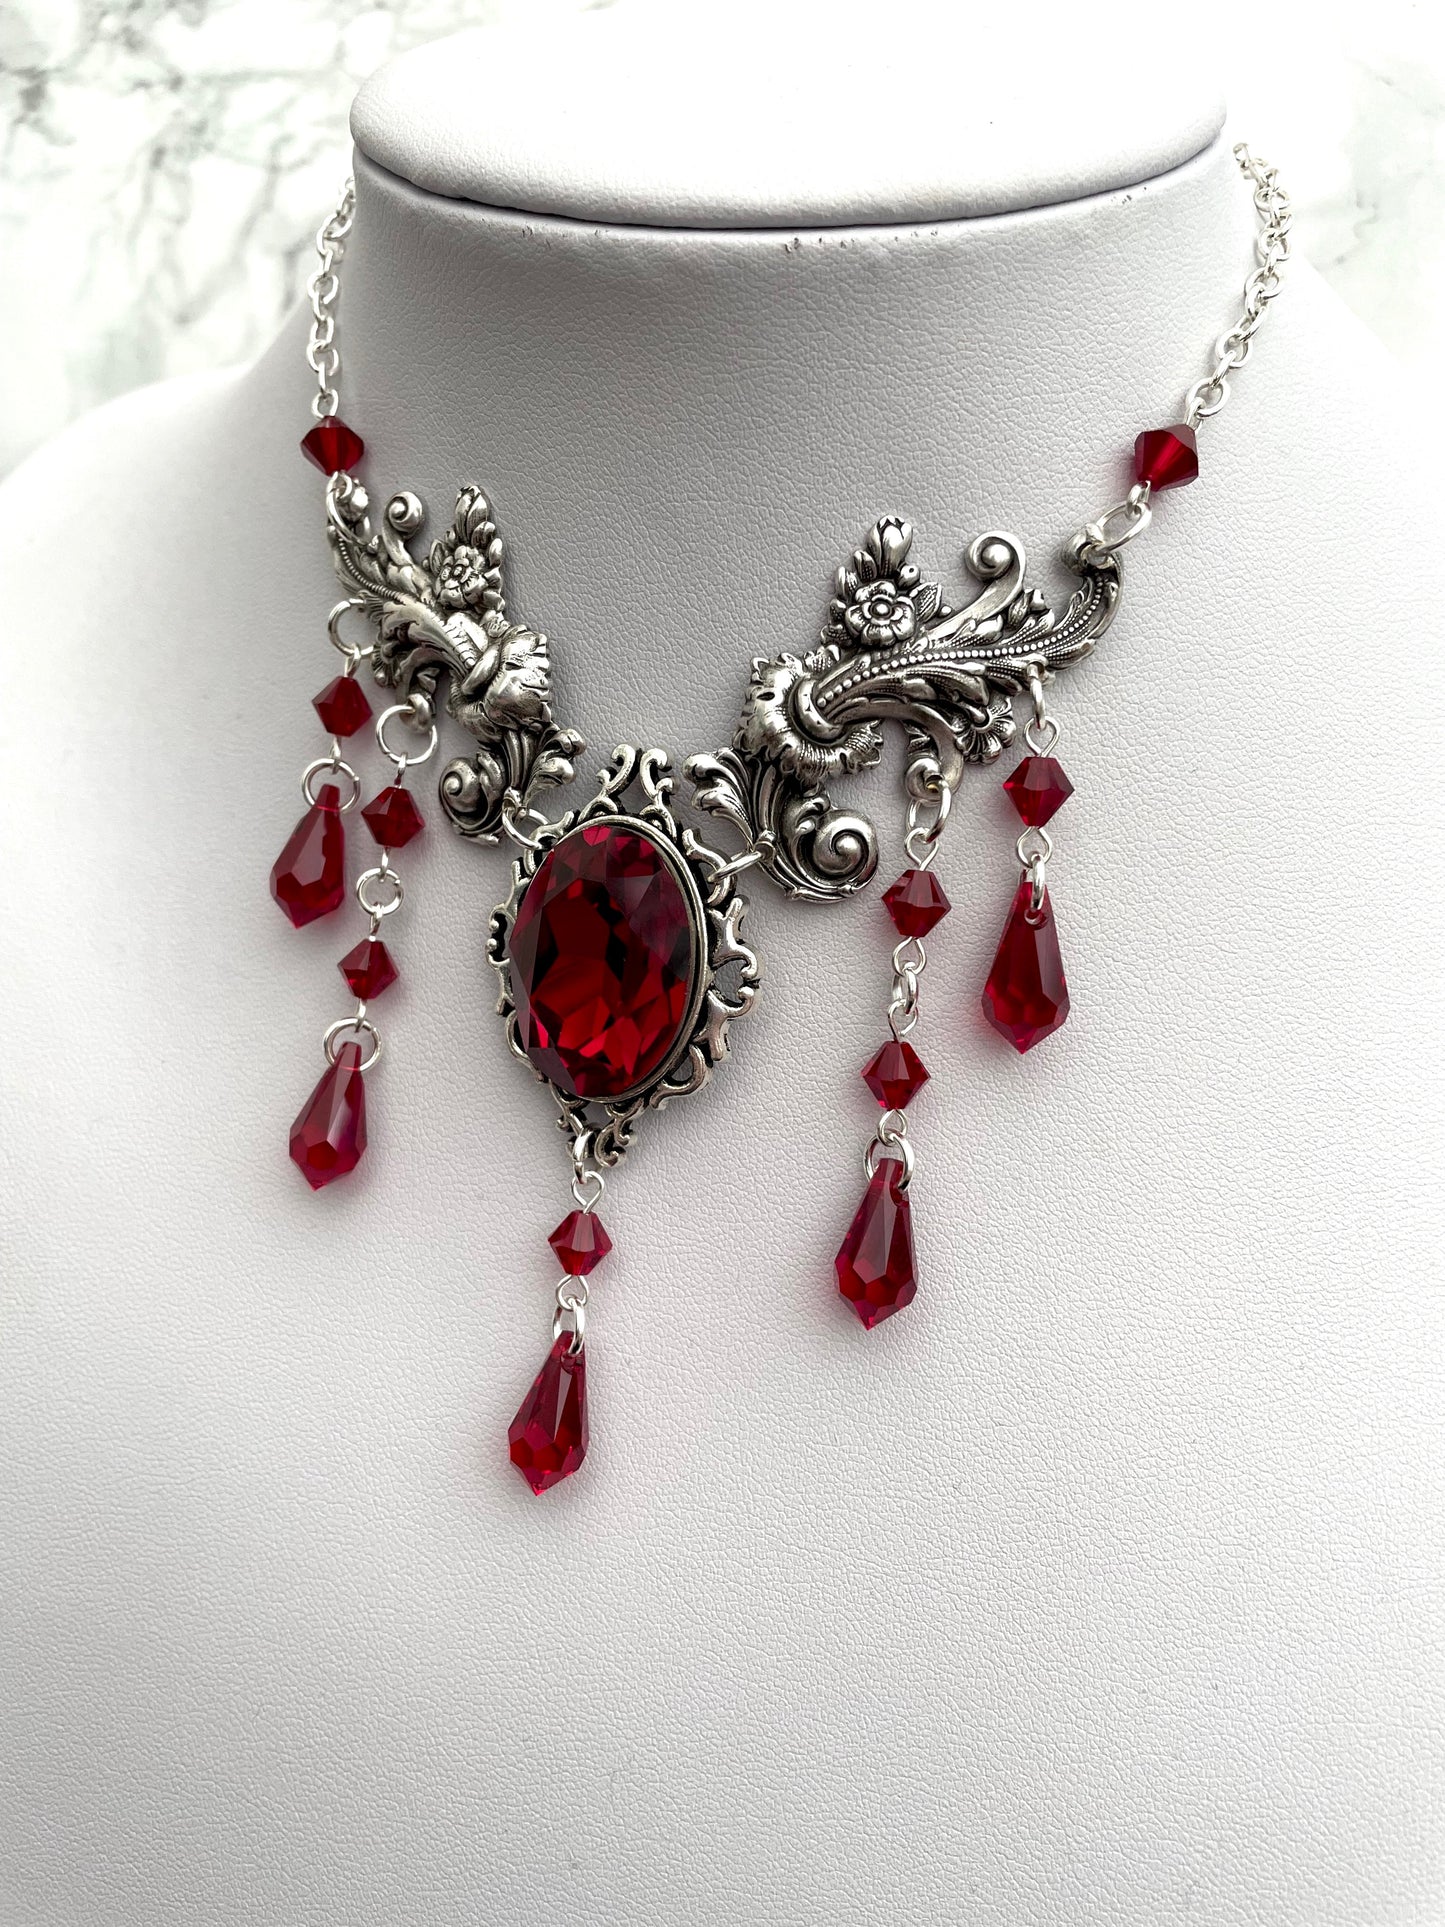 Gothic drop necklace, red drop necklace, necklace with red drops, silver necklace with drops, gothic necklace, goth necklace, goth jewellery, goth jewelry, vampire necklace, vampire choker, vampire drop necklace, blood drop necklace, blood drop choker, bl